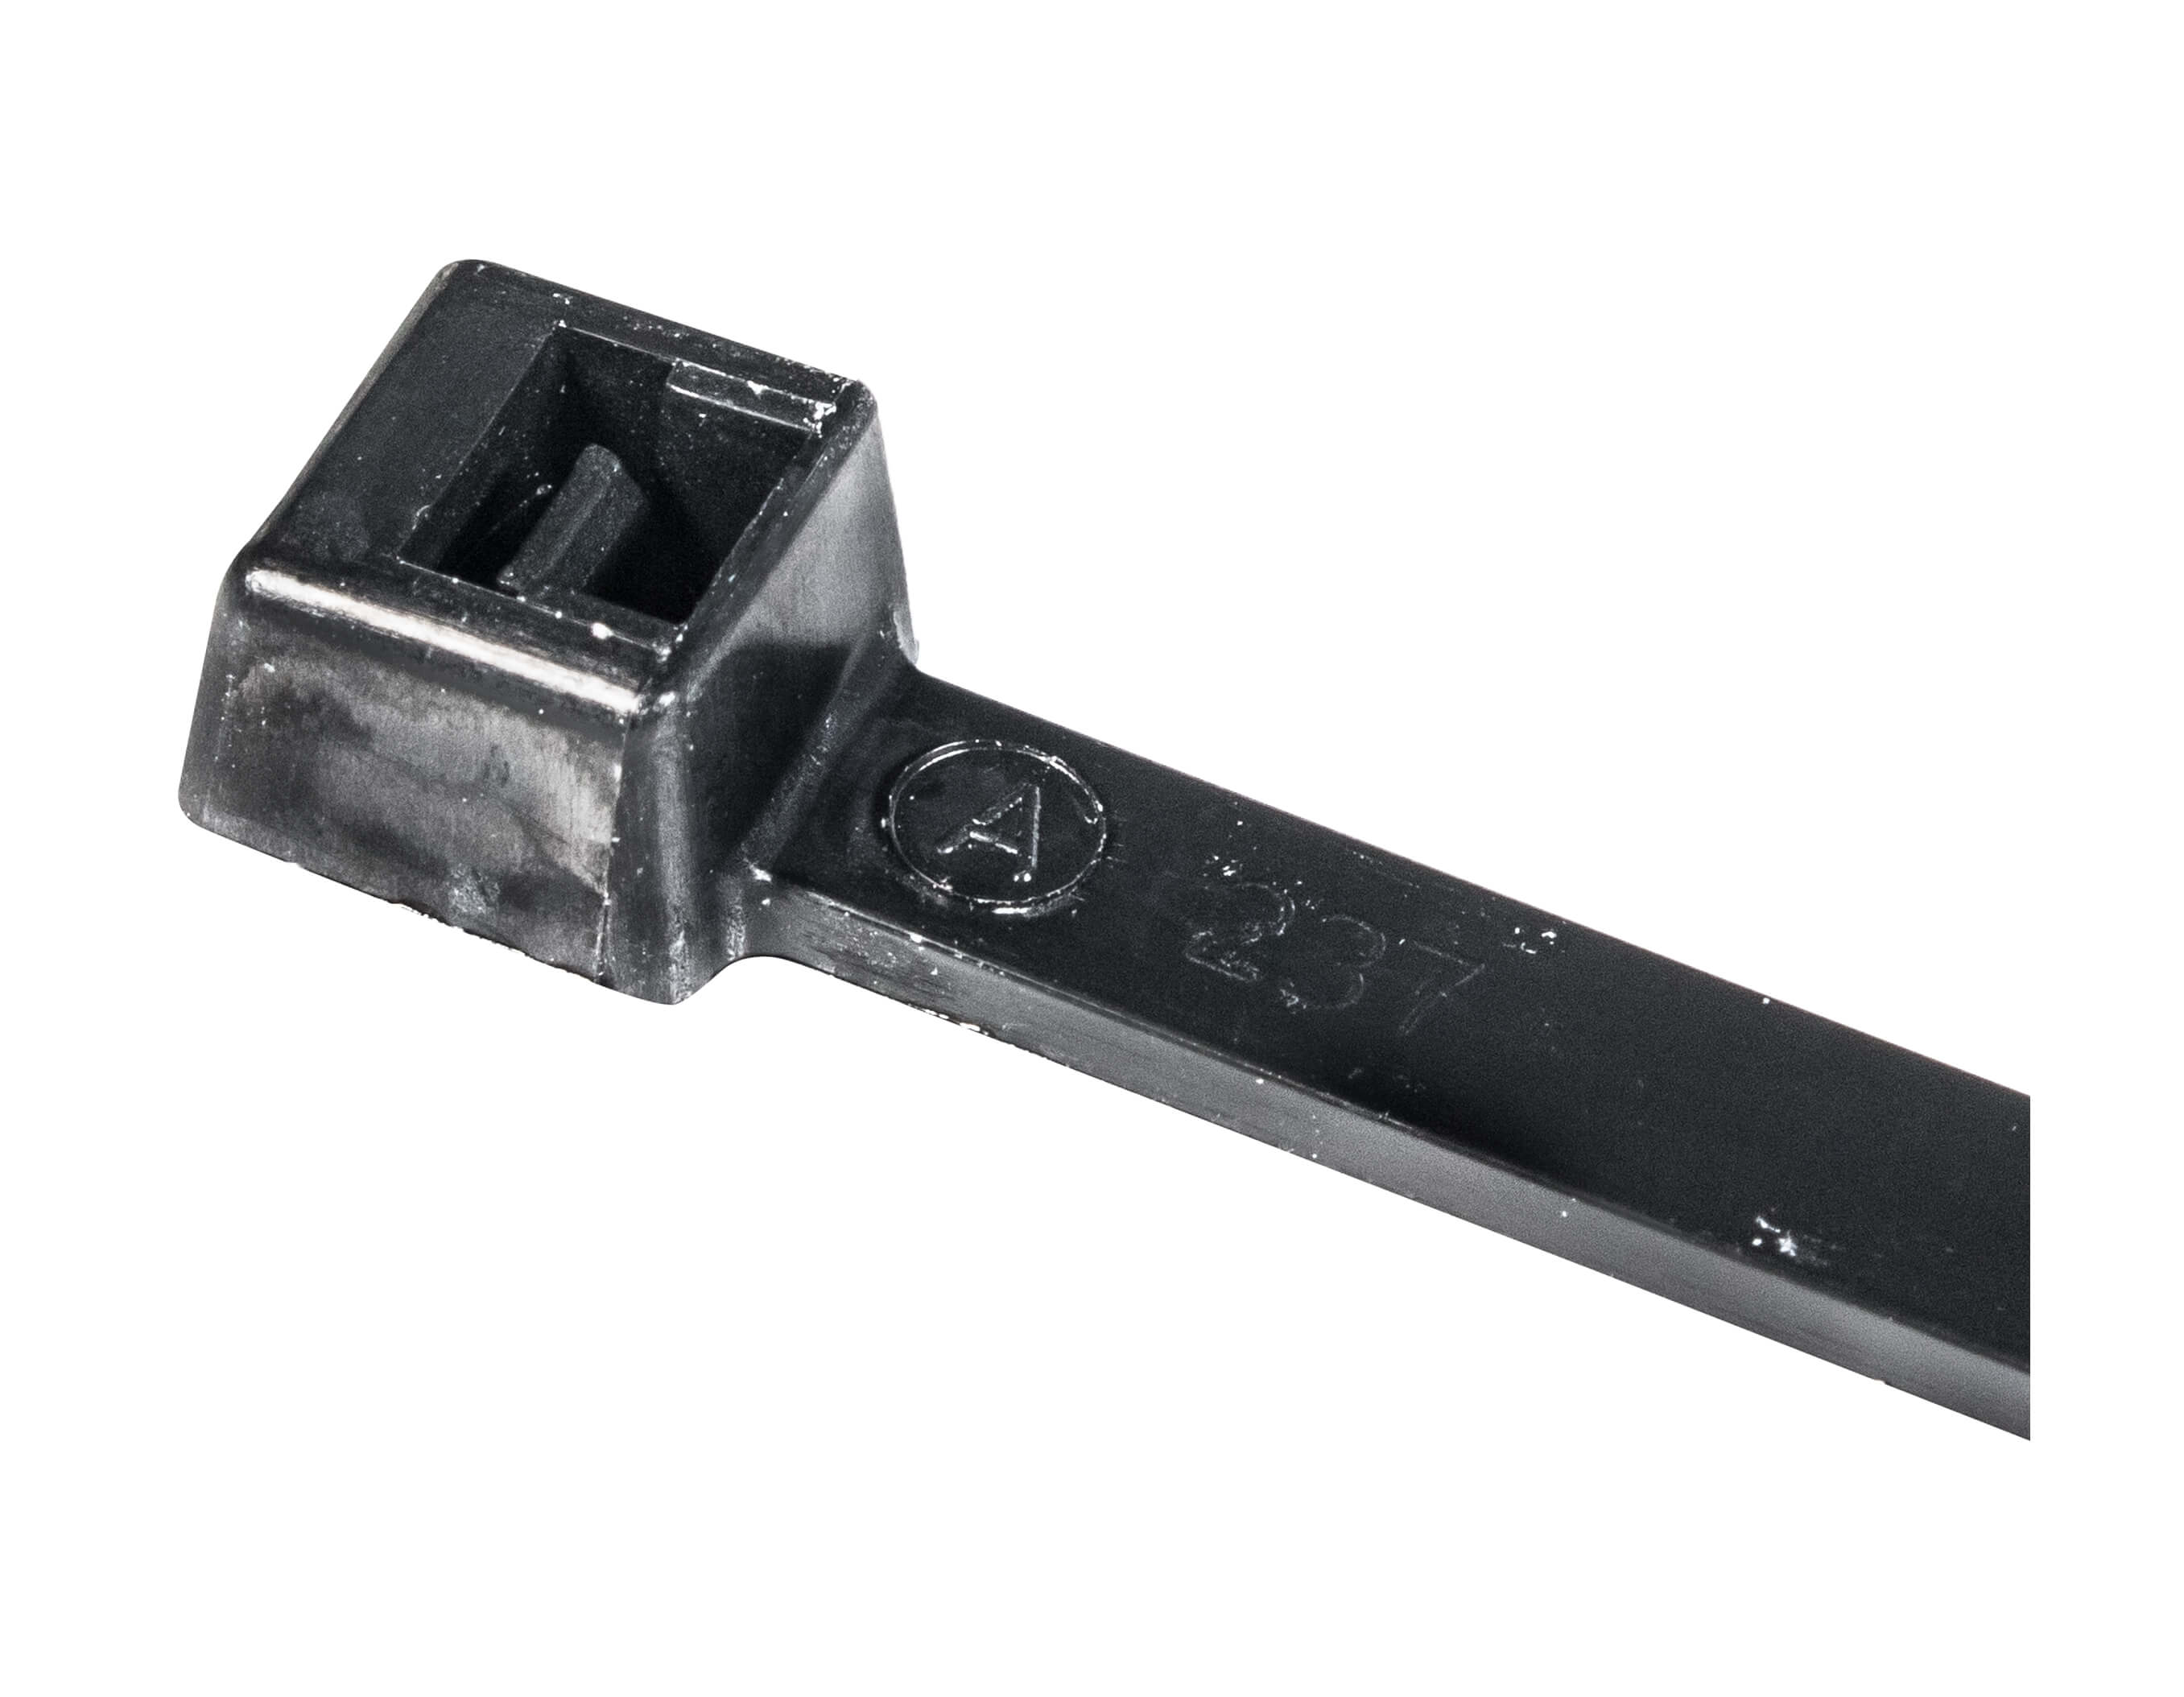 COLD TEMP. CABLE TIE BLACK 0.18 X 14.25" 50LBS